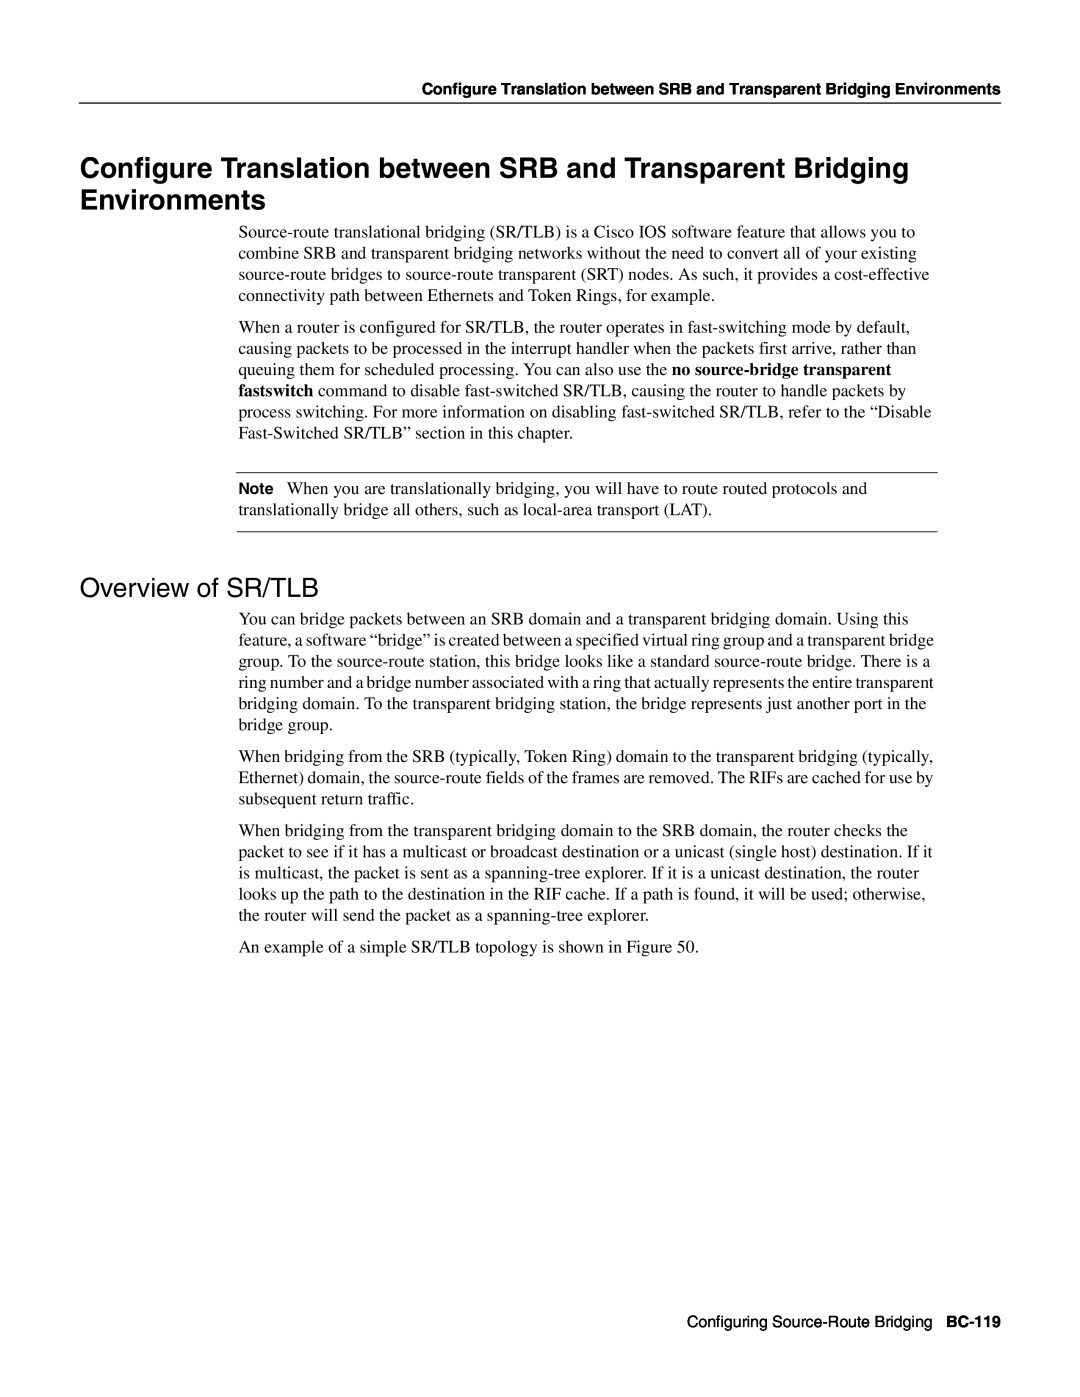 Cisco Systems BC-109 manual Overview of SR/TLB 